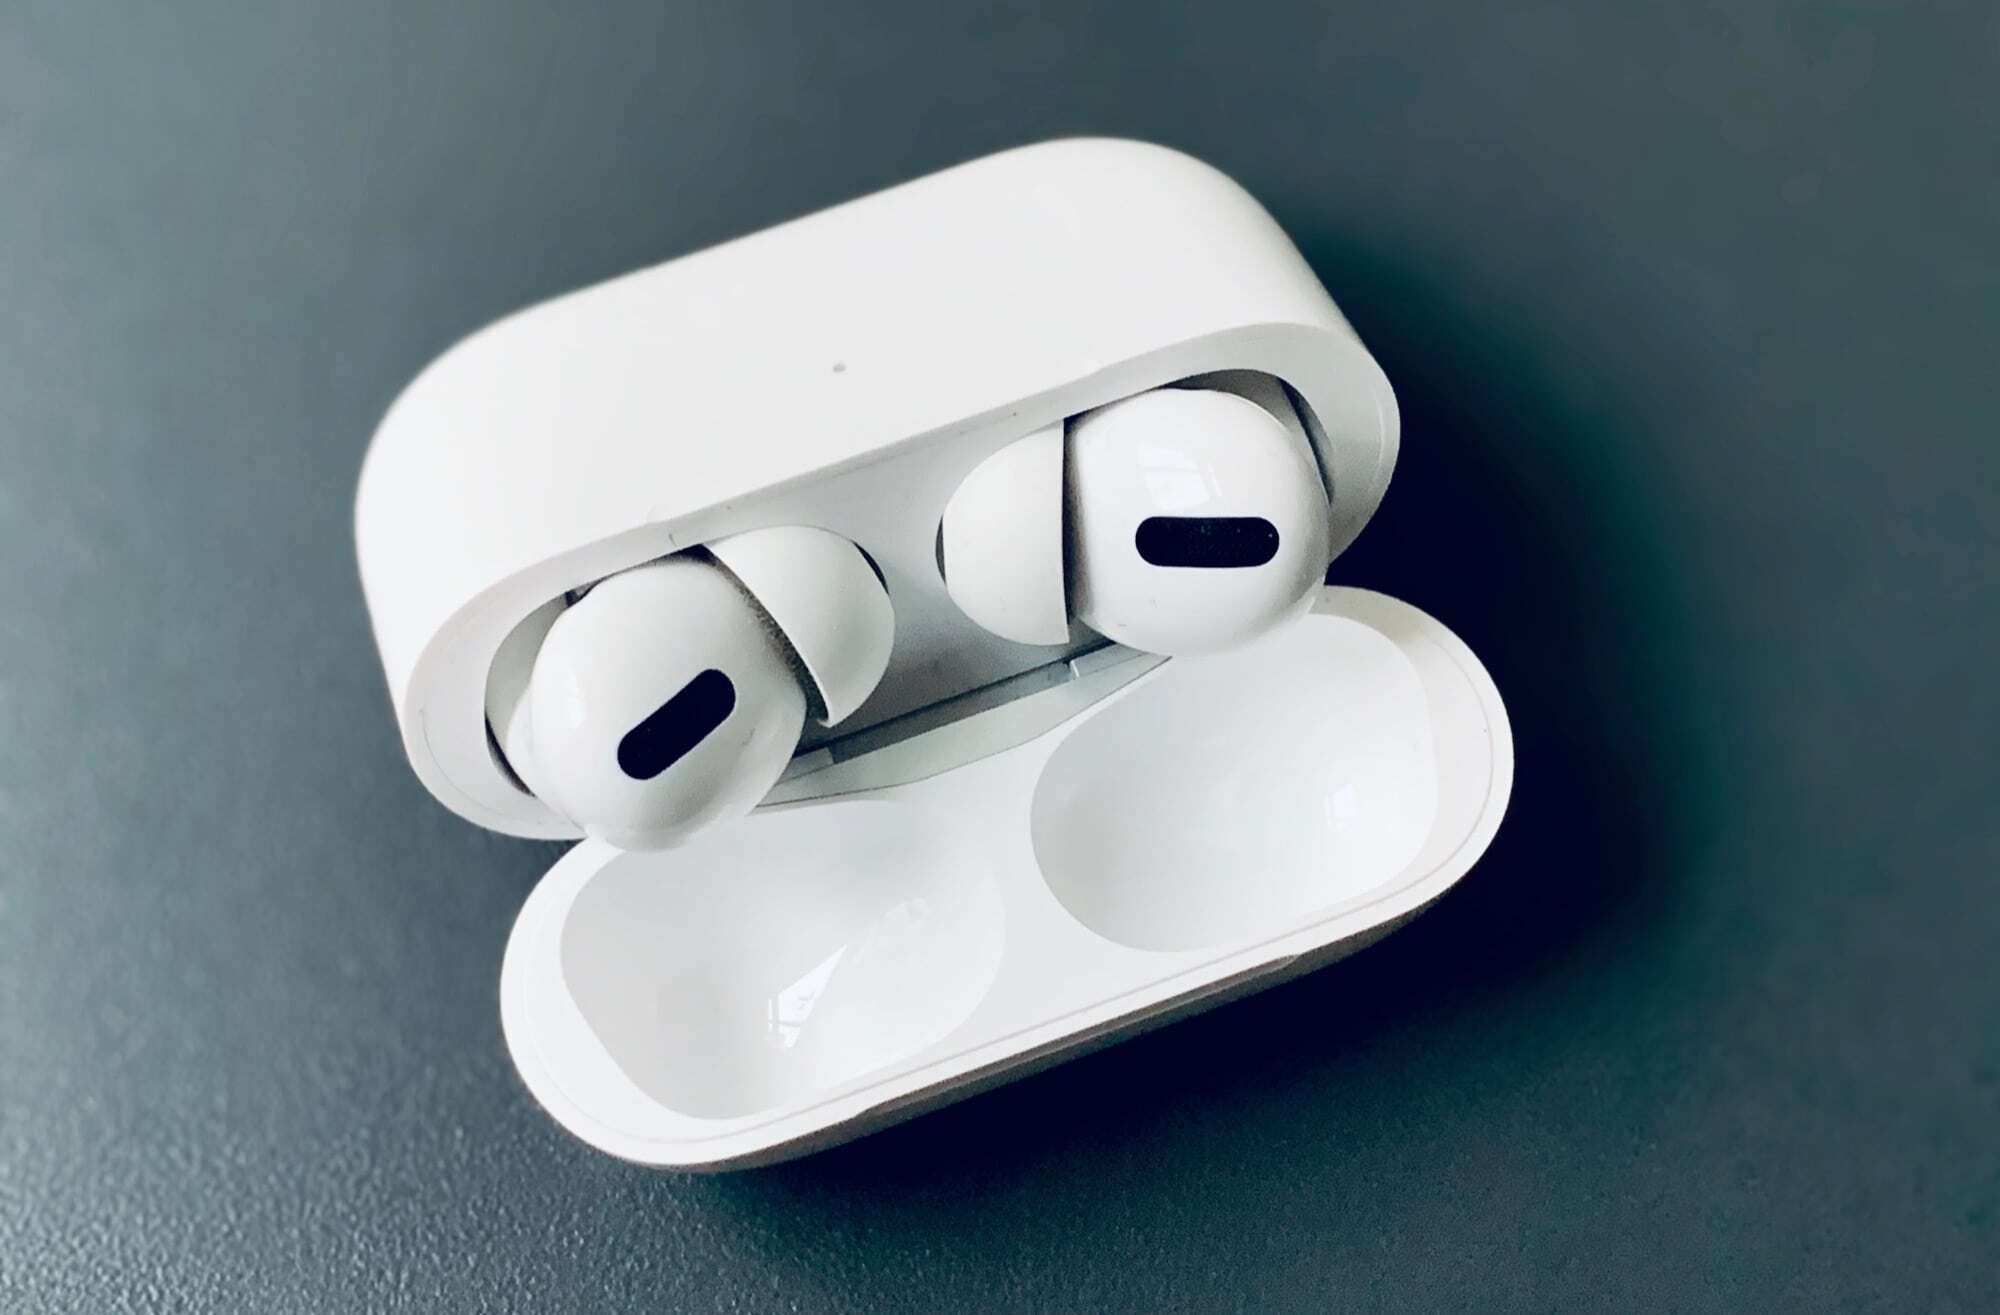 Airpods 3 1. AIRPODS Pro 2. AIRPODS Pro 6. AIRPODS Pro 5. Apple AIRPODS Pro 1.